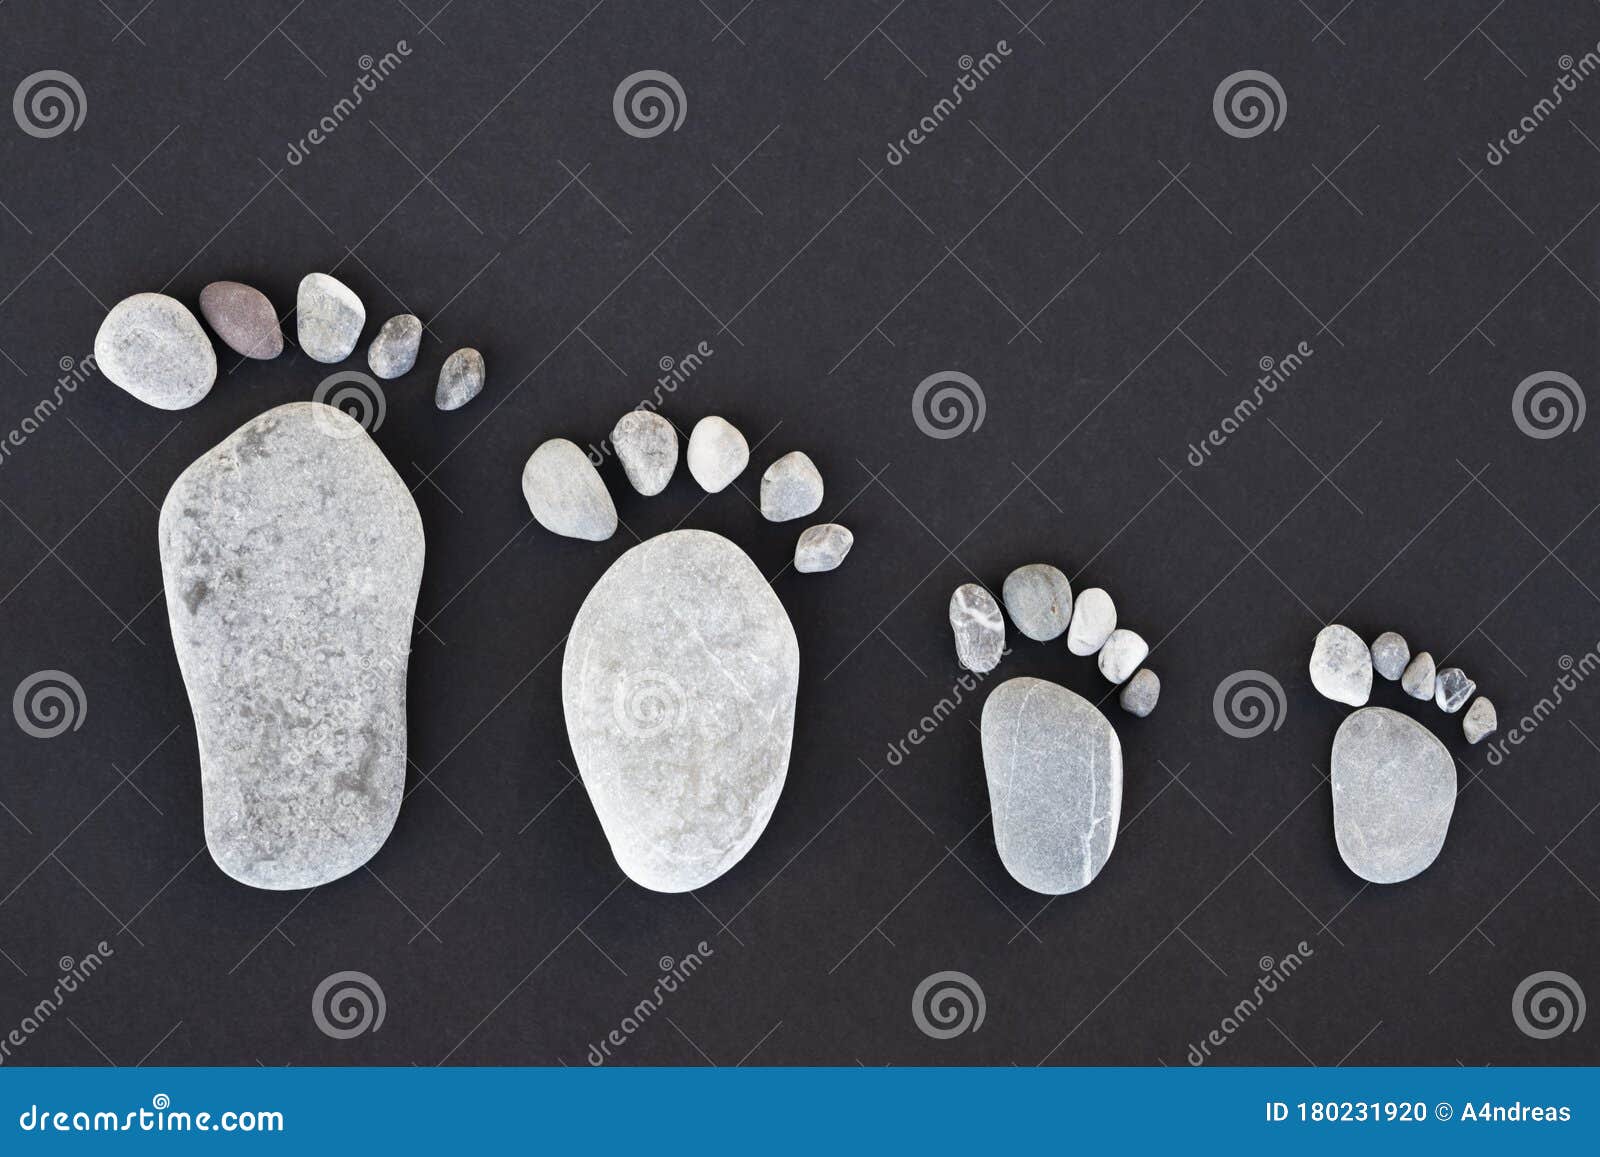 ic lime stones forming stone foots of parents and two kids